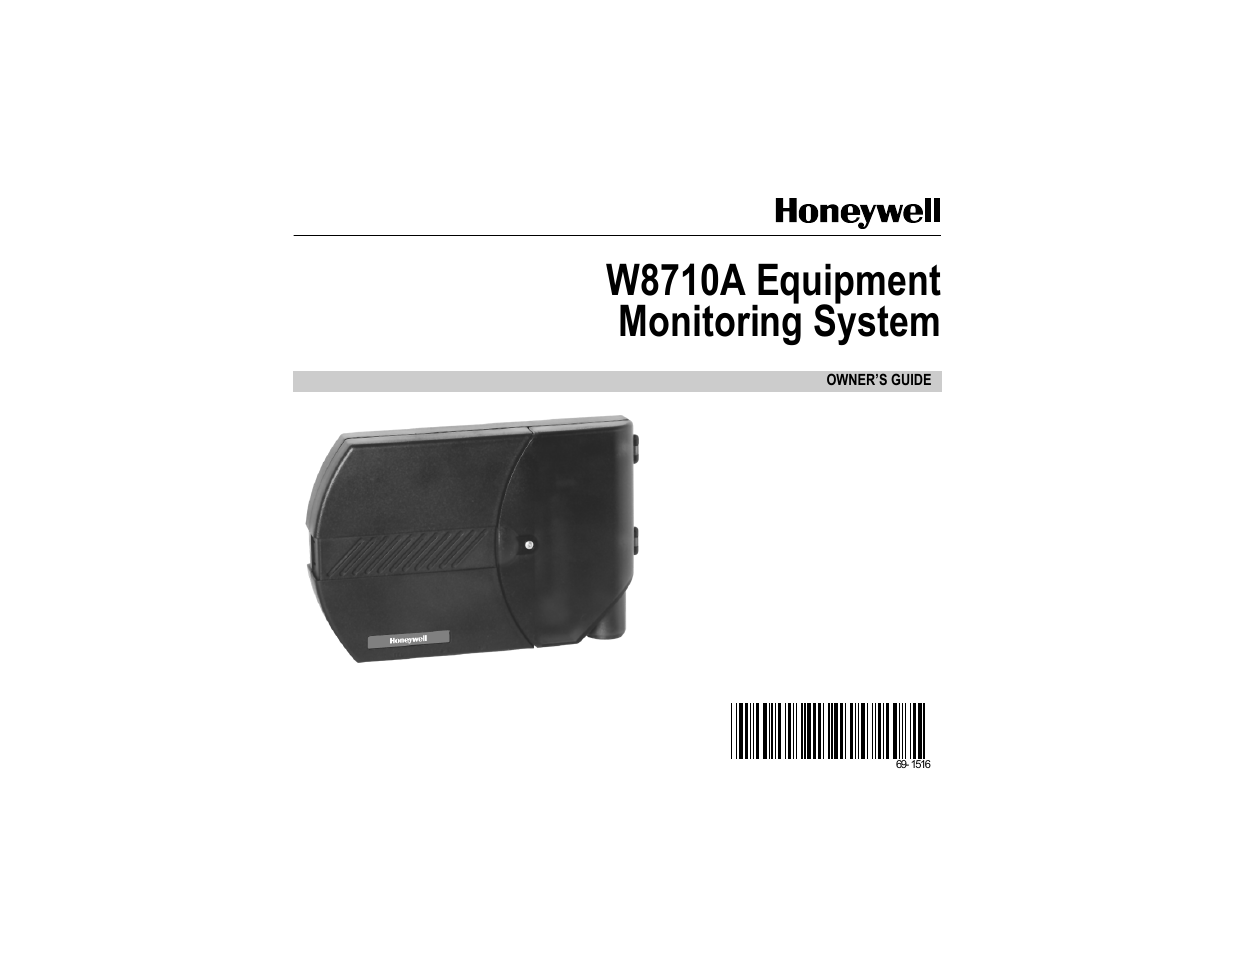 EQUIPMENT MONITORING SYSTEM W8710A